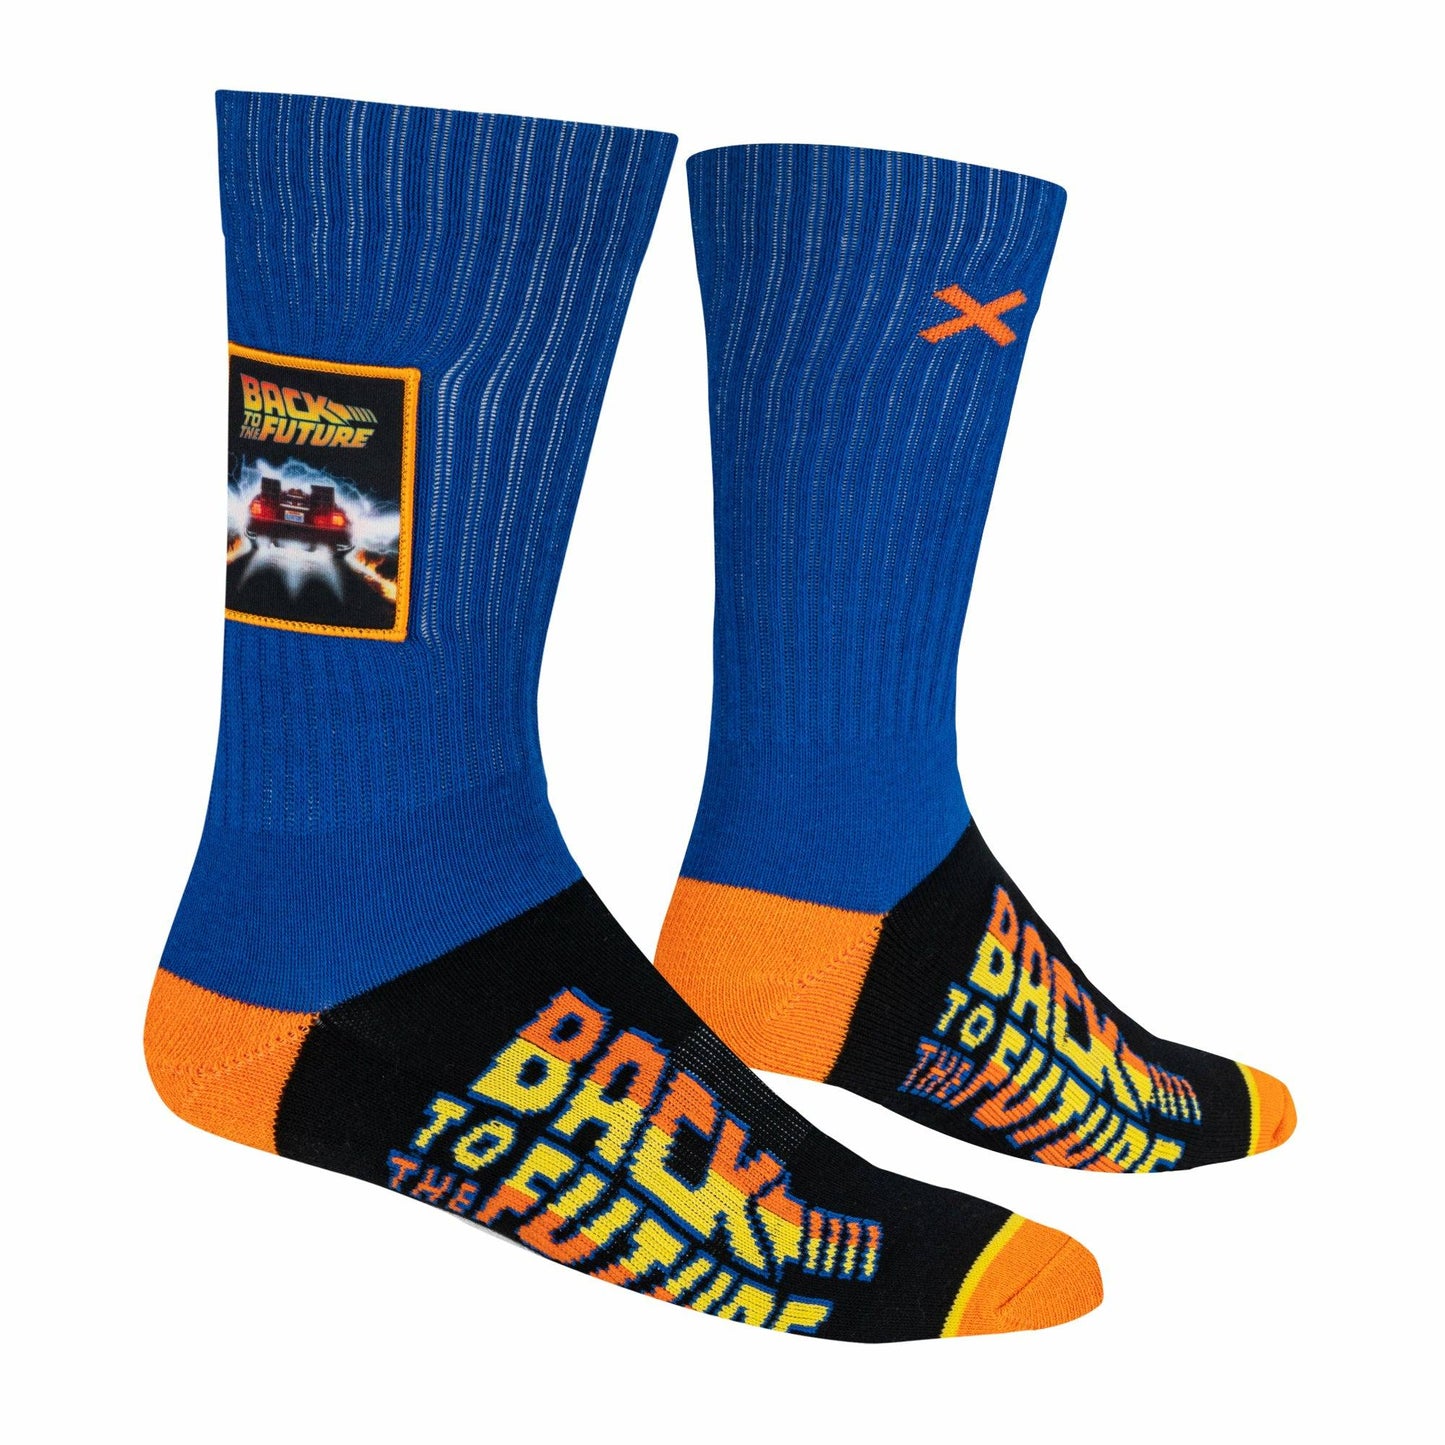 Back to the Future "Patch" Men's Crew Sideways Socks (Size 8-12)